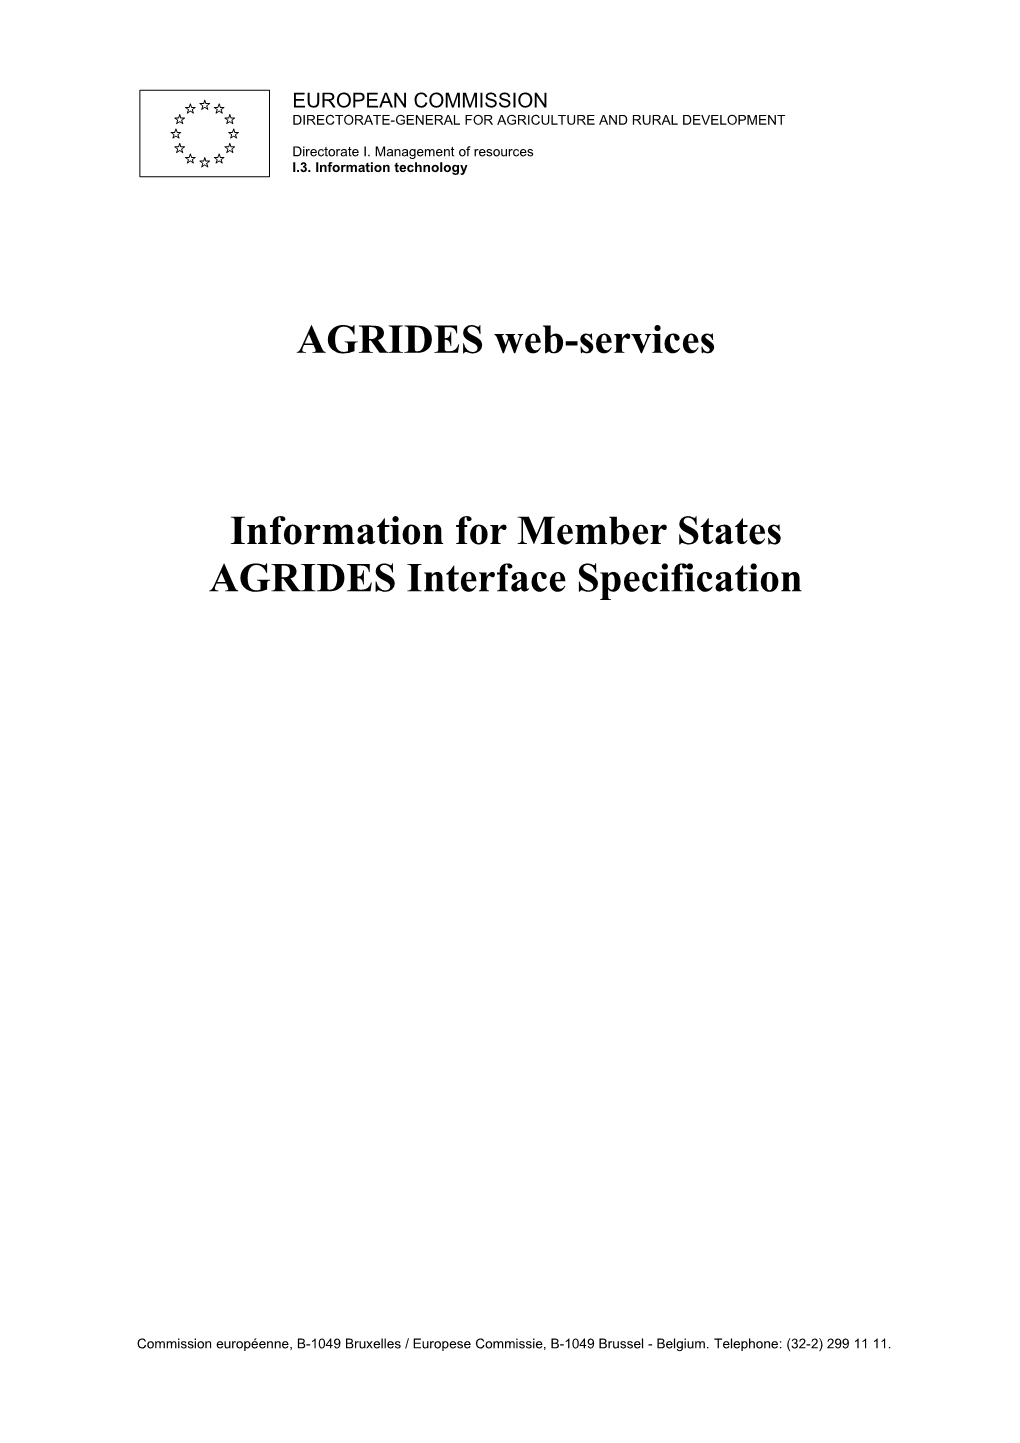 AGRIDES Interface Specification